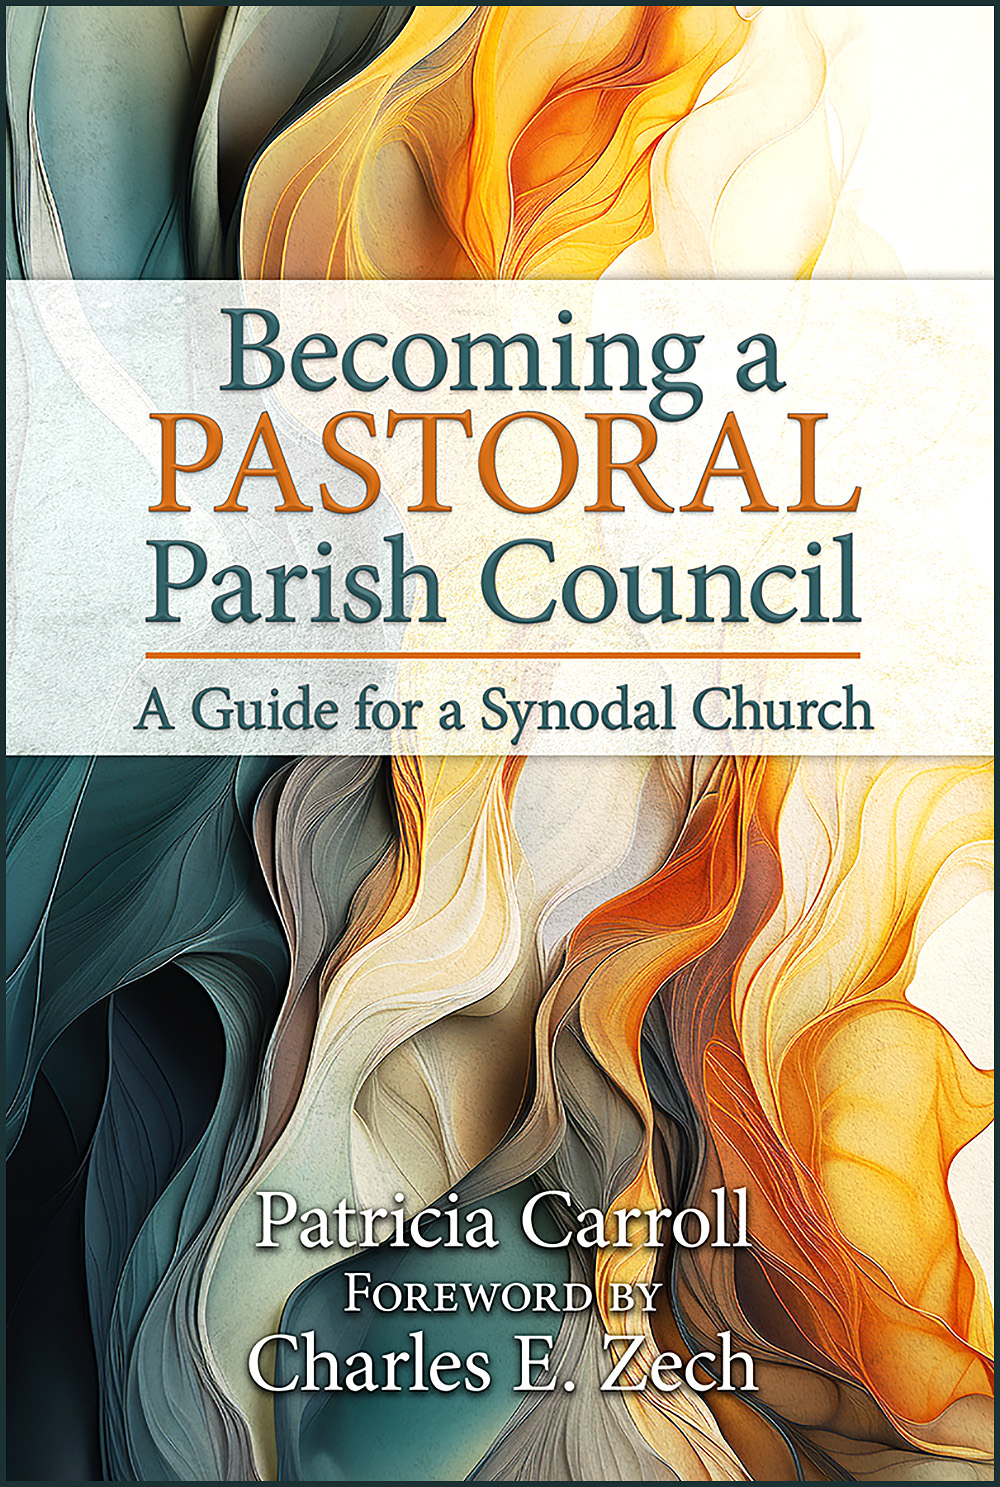 Becoming a Pastoral Parish Council: A Guide for a Synodal Church